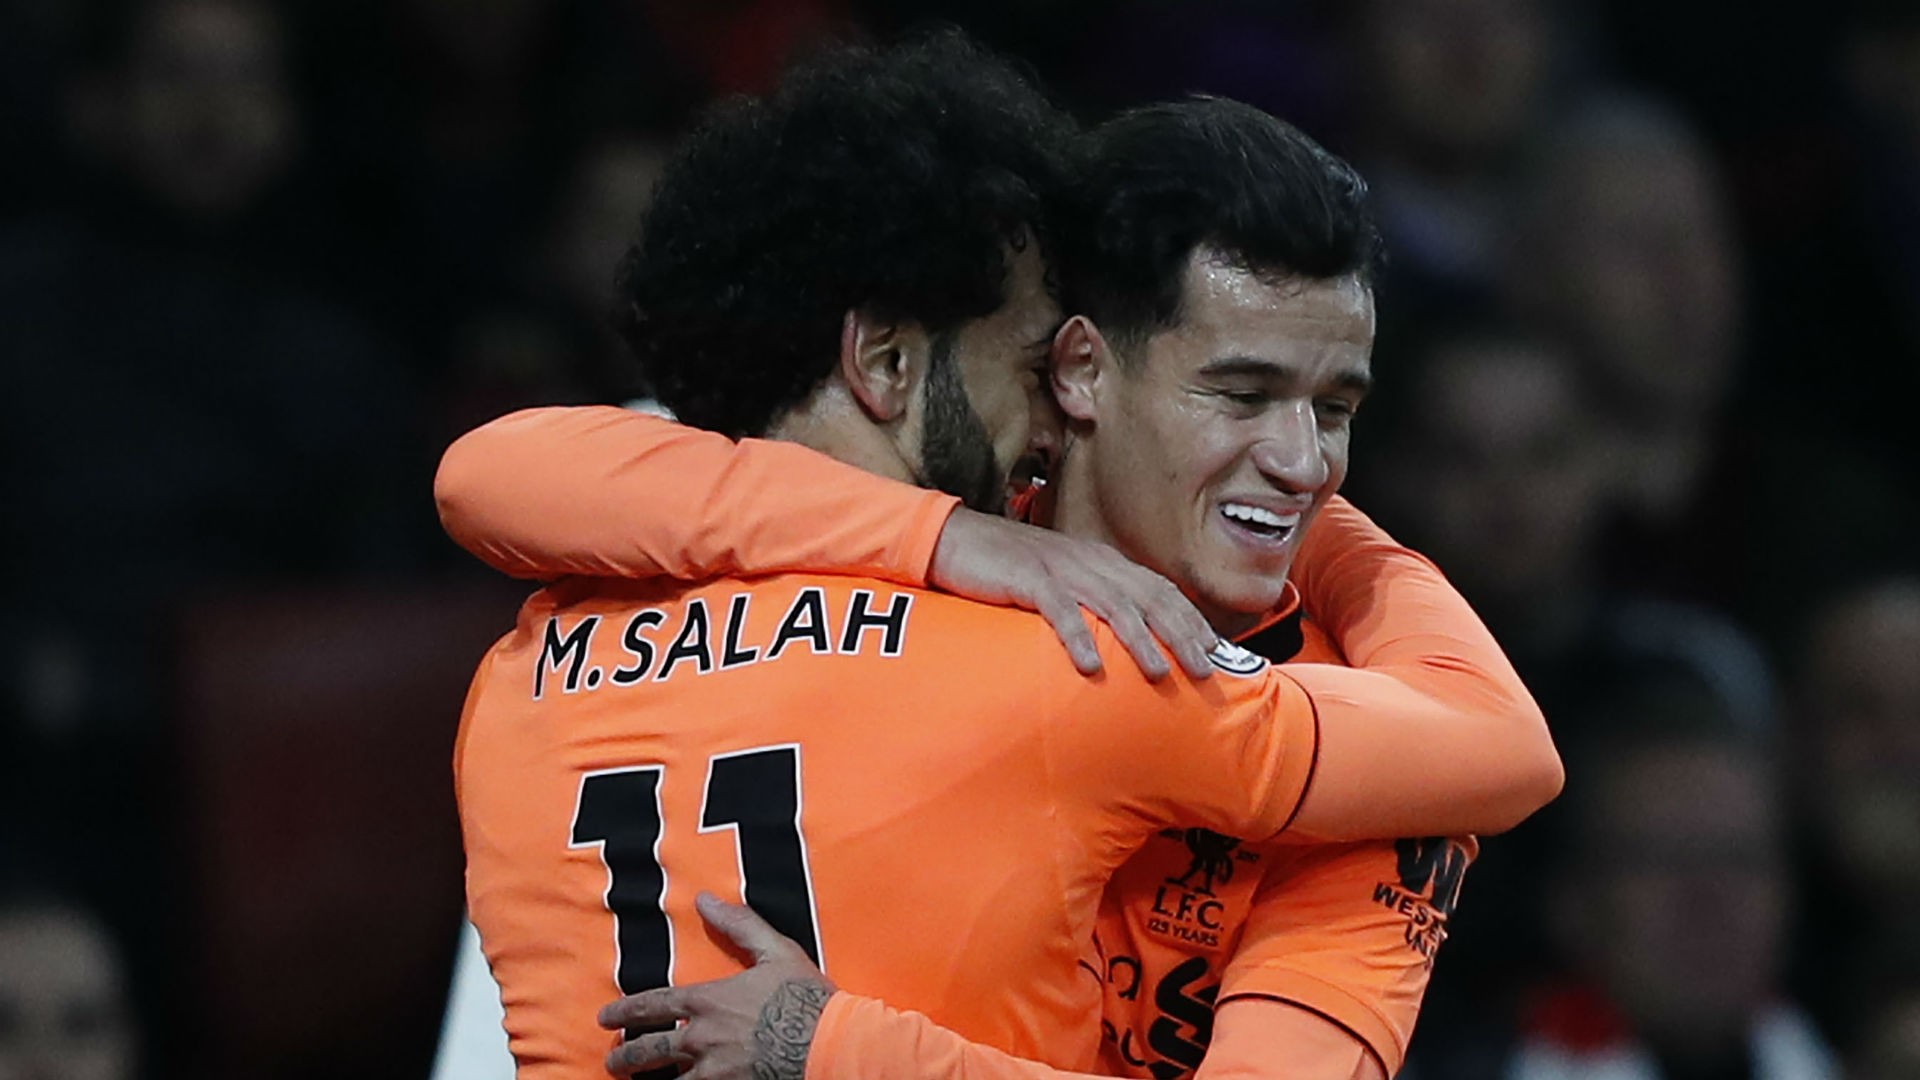 https://images.performgroup.com/di/library/GOAL/1e/7a/philippe-coutinho-mohamed-salah-liverpool_1b2i0ea5cptym1o7phahjfsyjf.jpg?t=2142286520&quality=90&w=0&h=1260